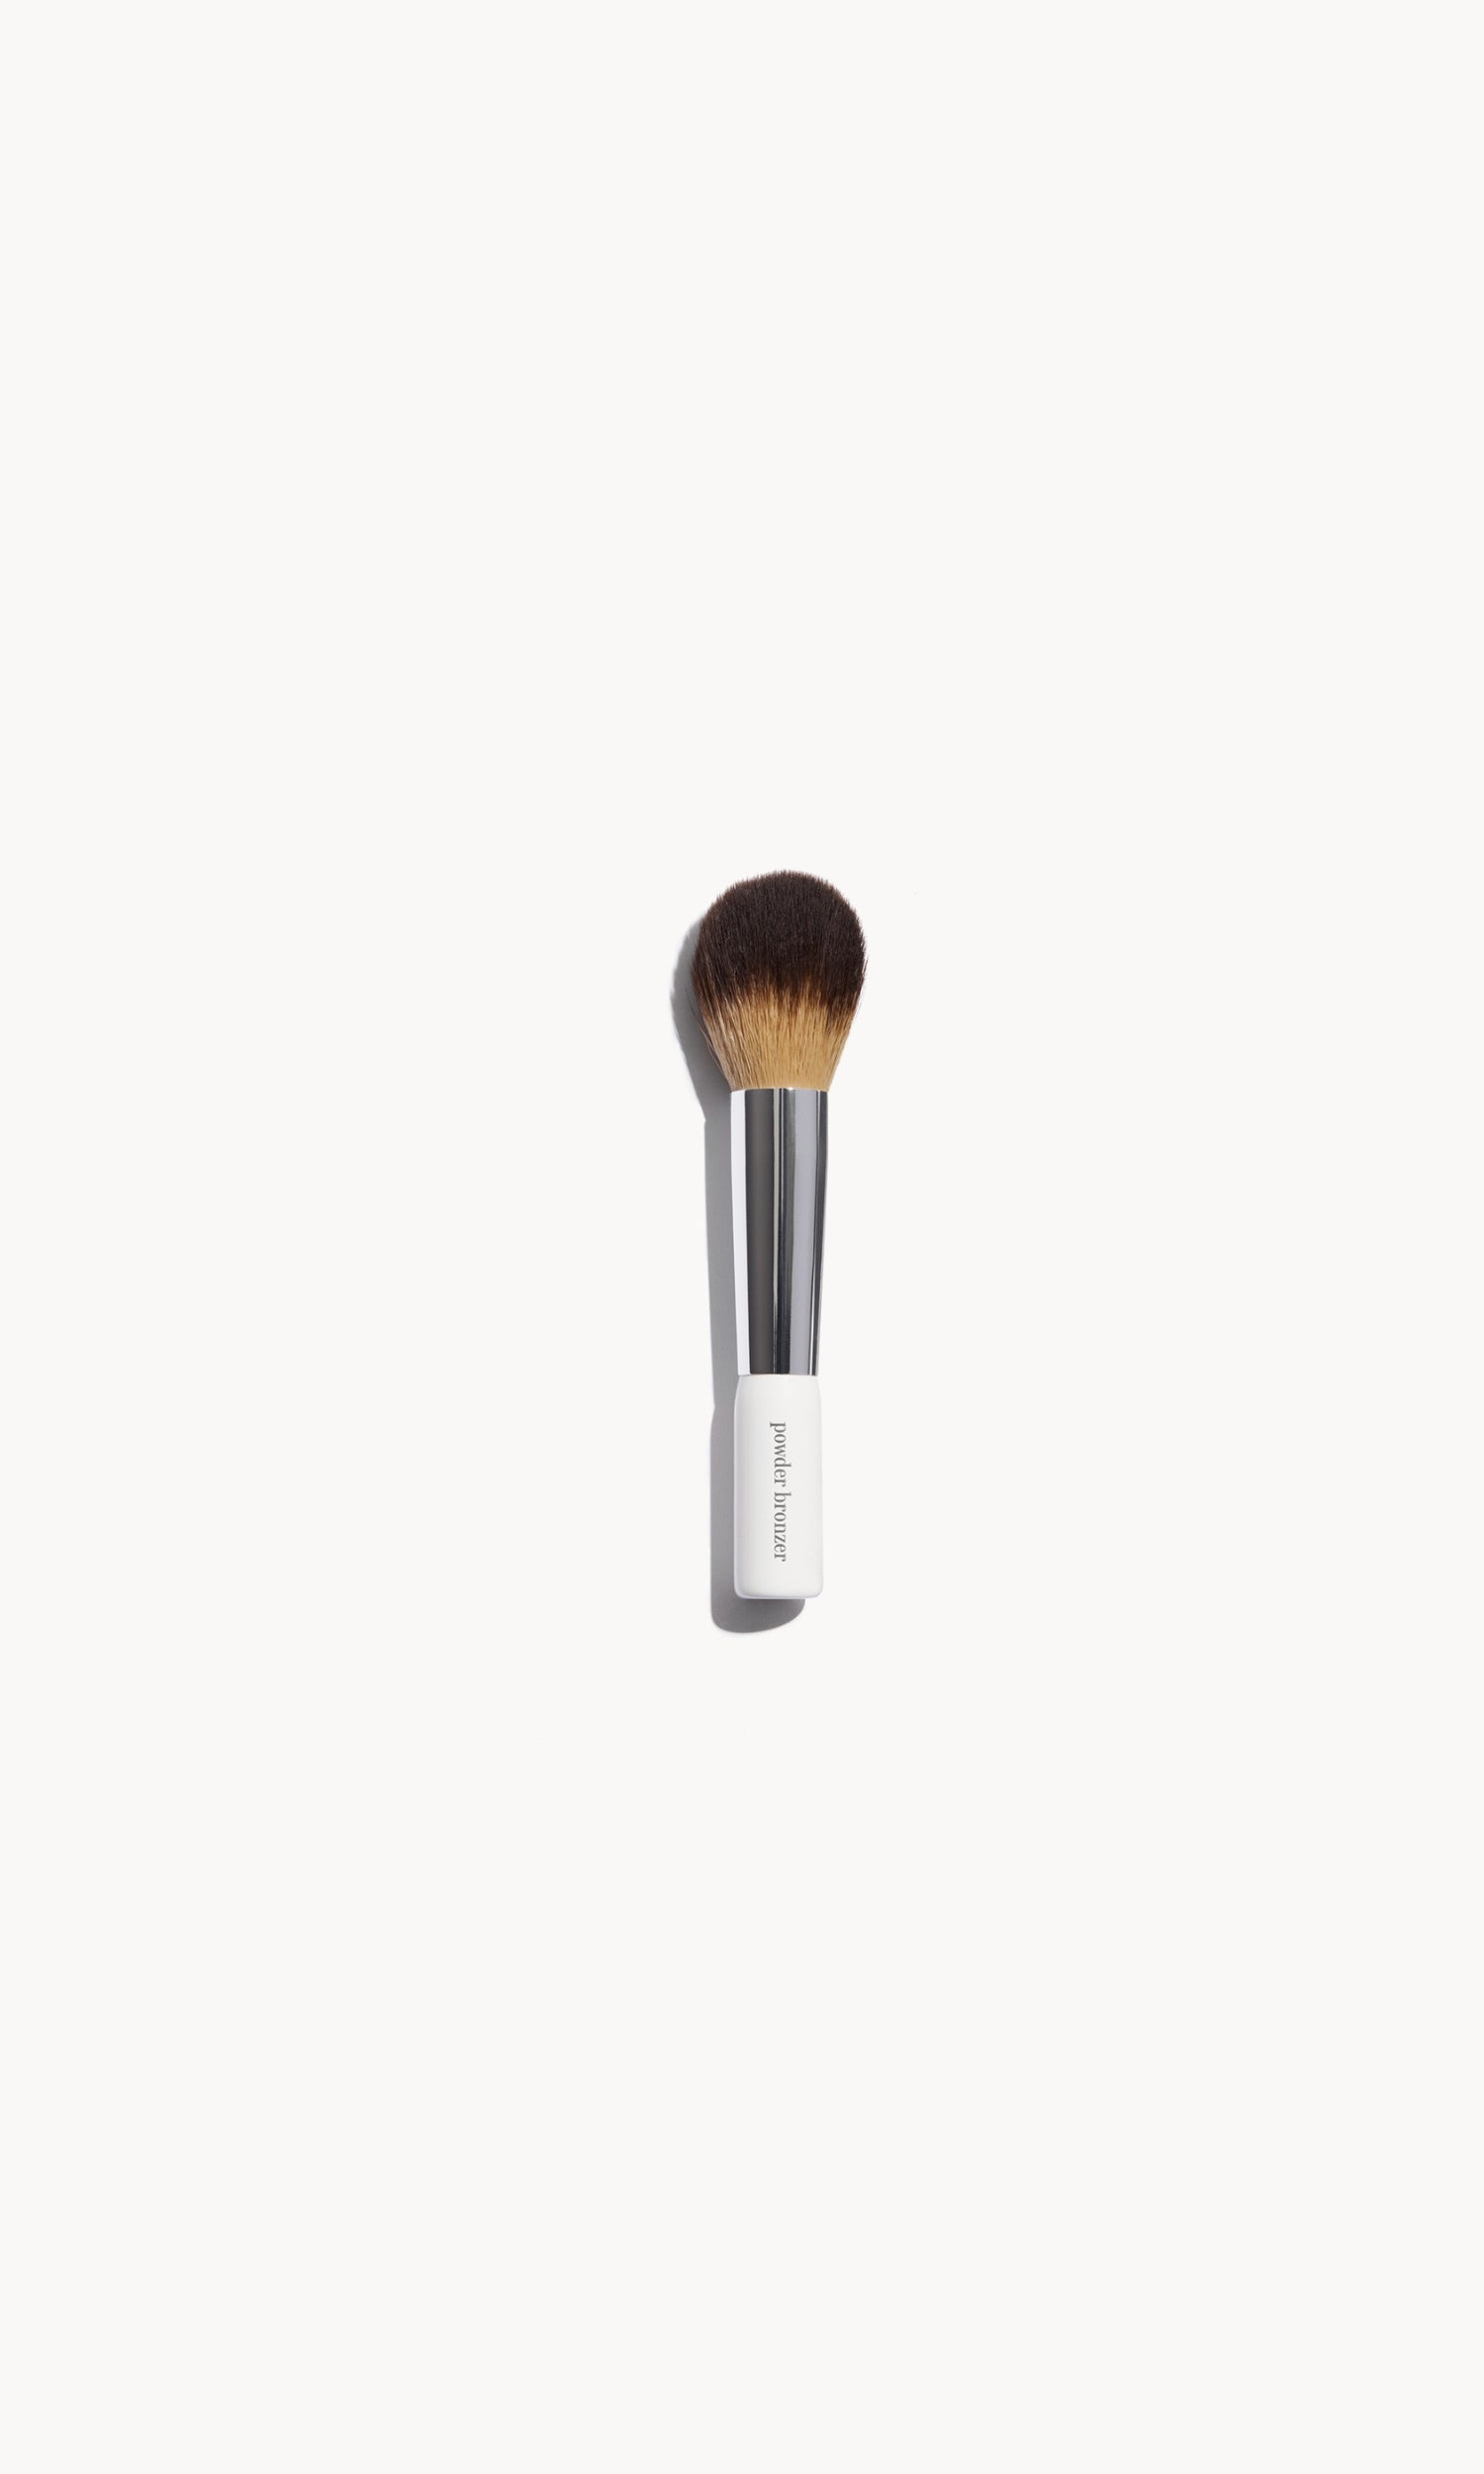 Makeup brush with white and silver handle and large rounded bristles on a white background